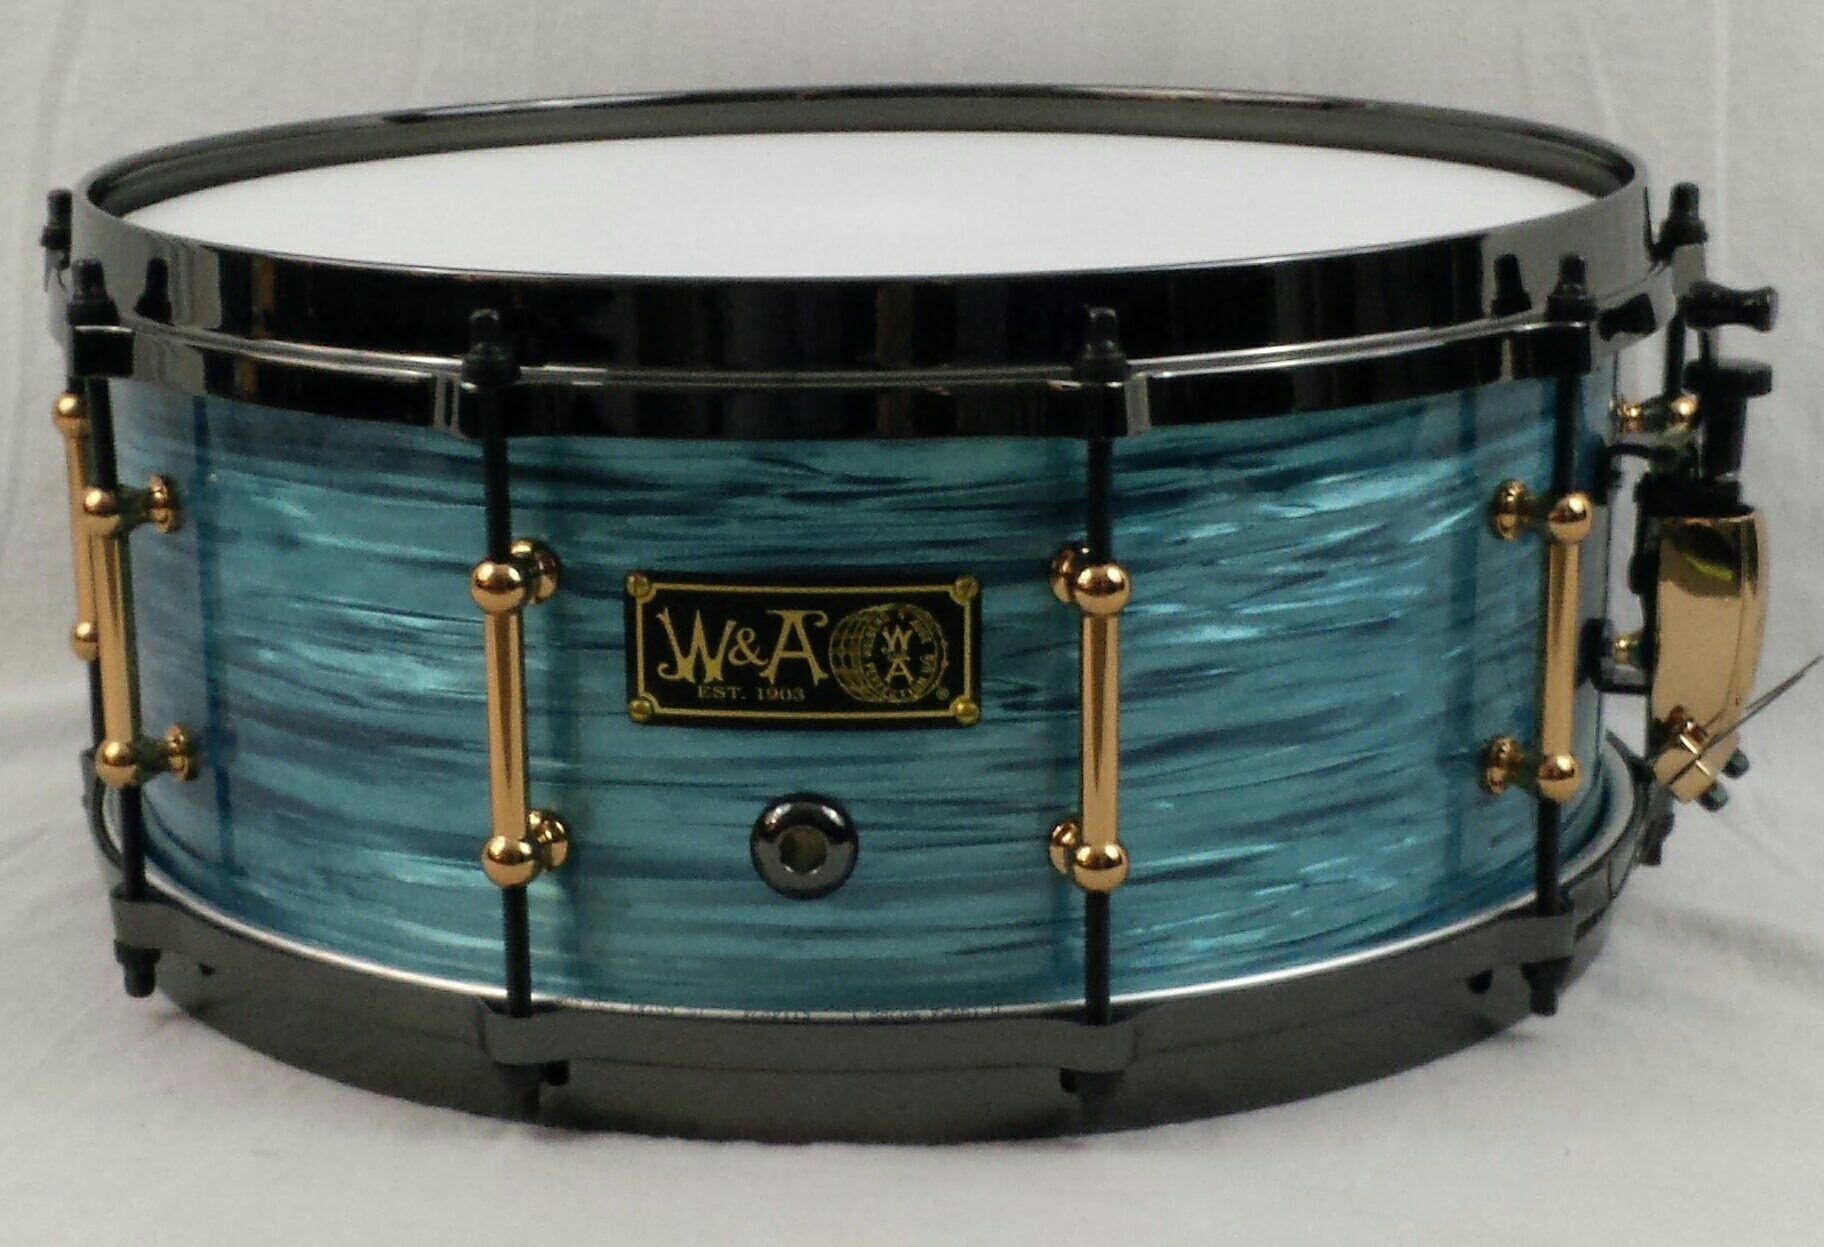 6x14 10ply Maple Shell wraped in turquoise rippleimage.jpg